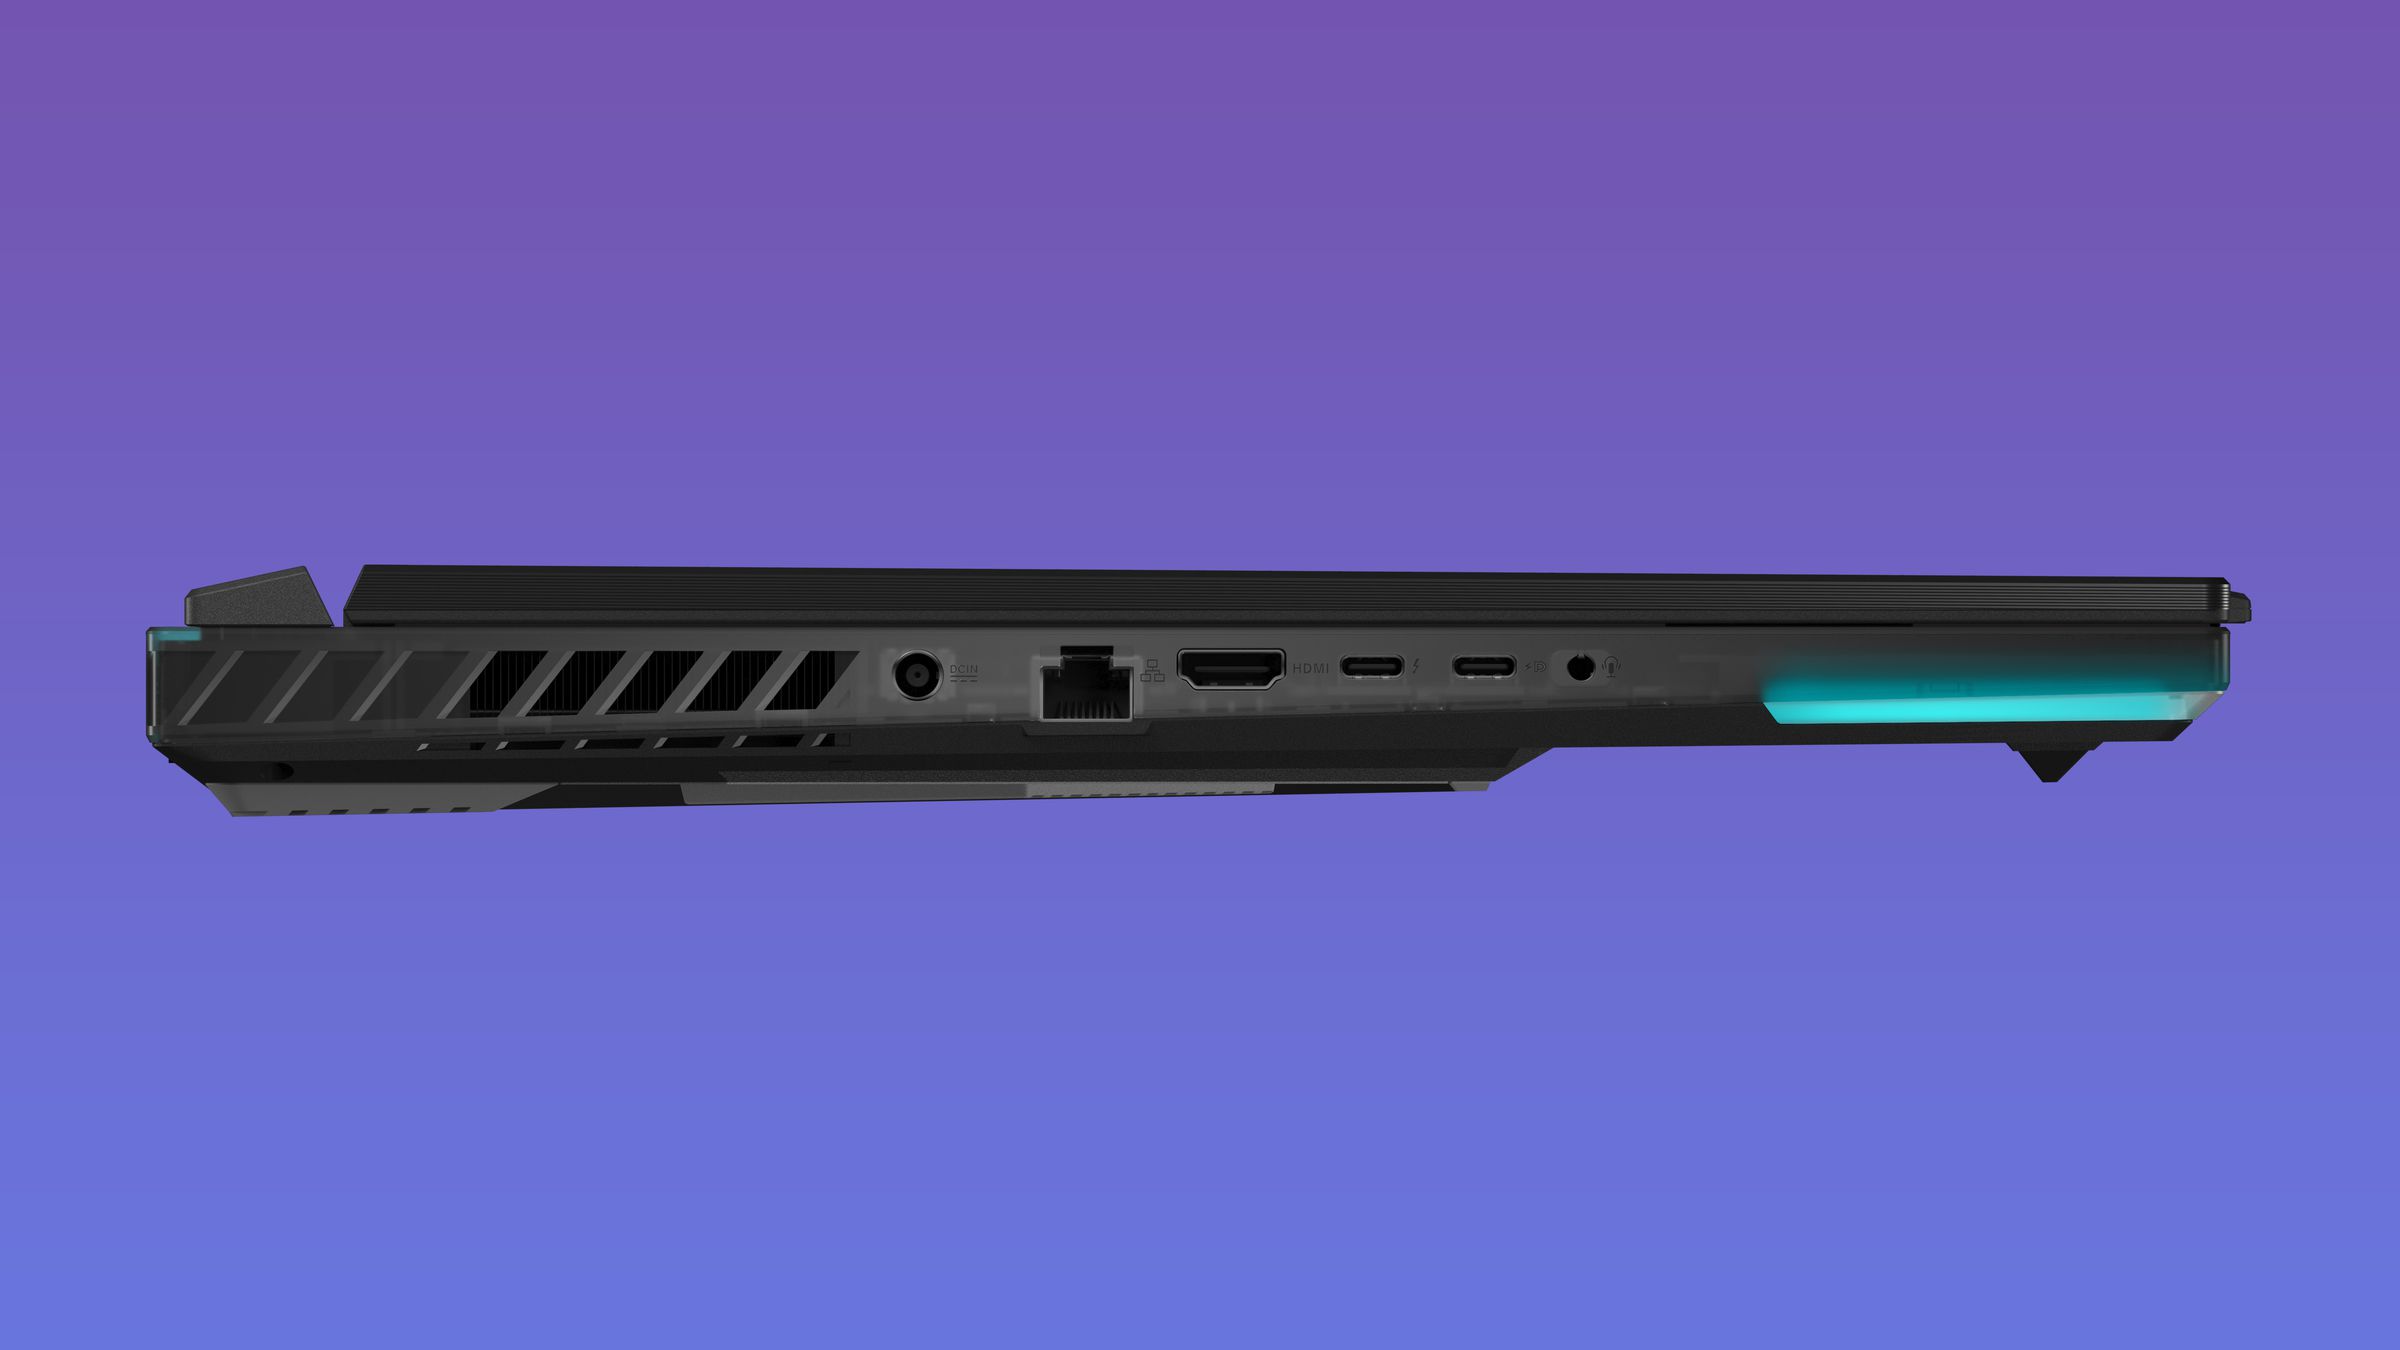 The Scar 18 will also have a translucent case.